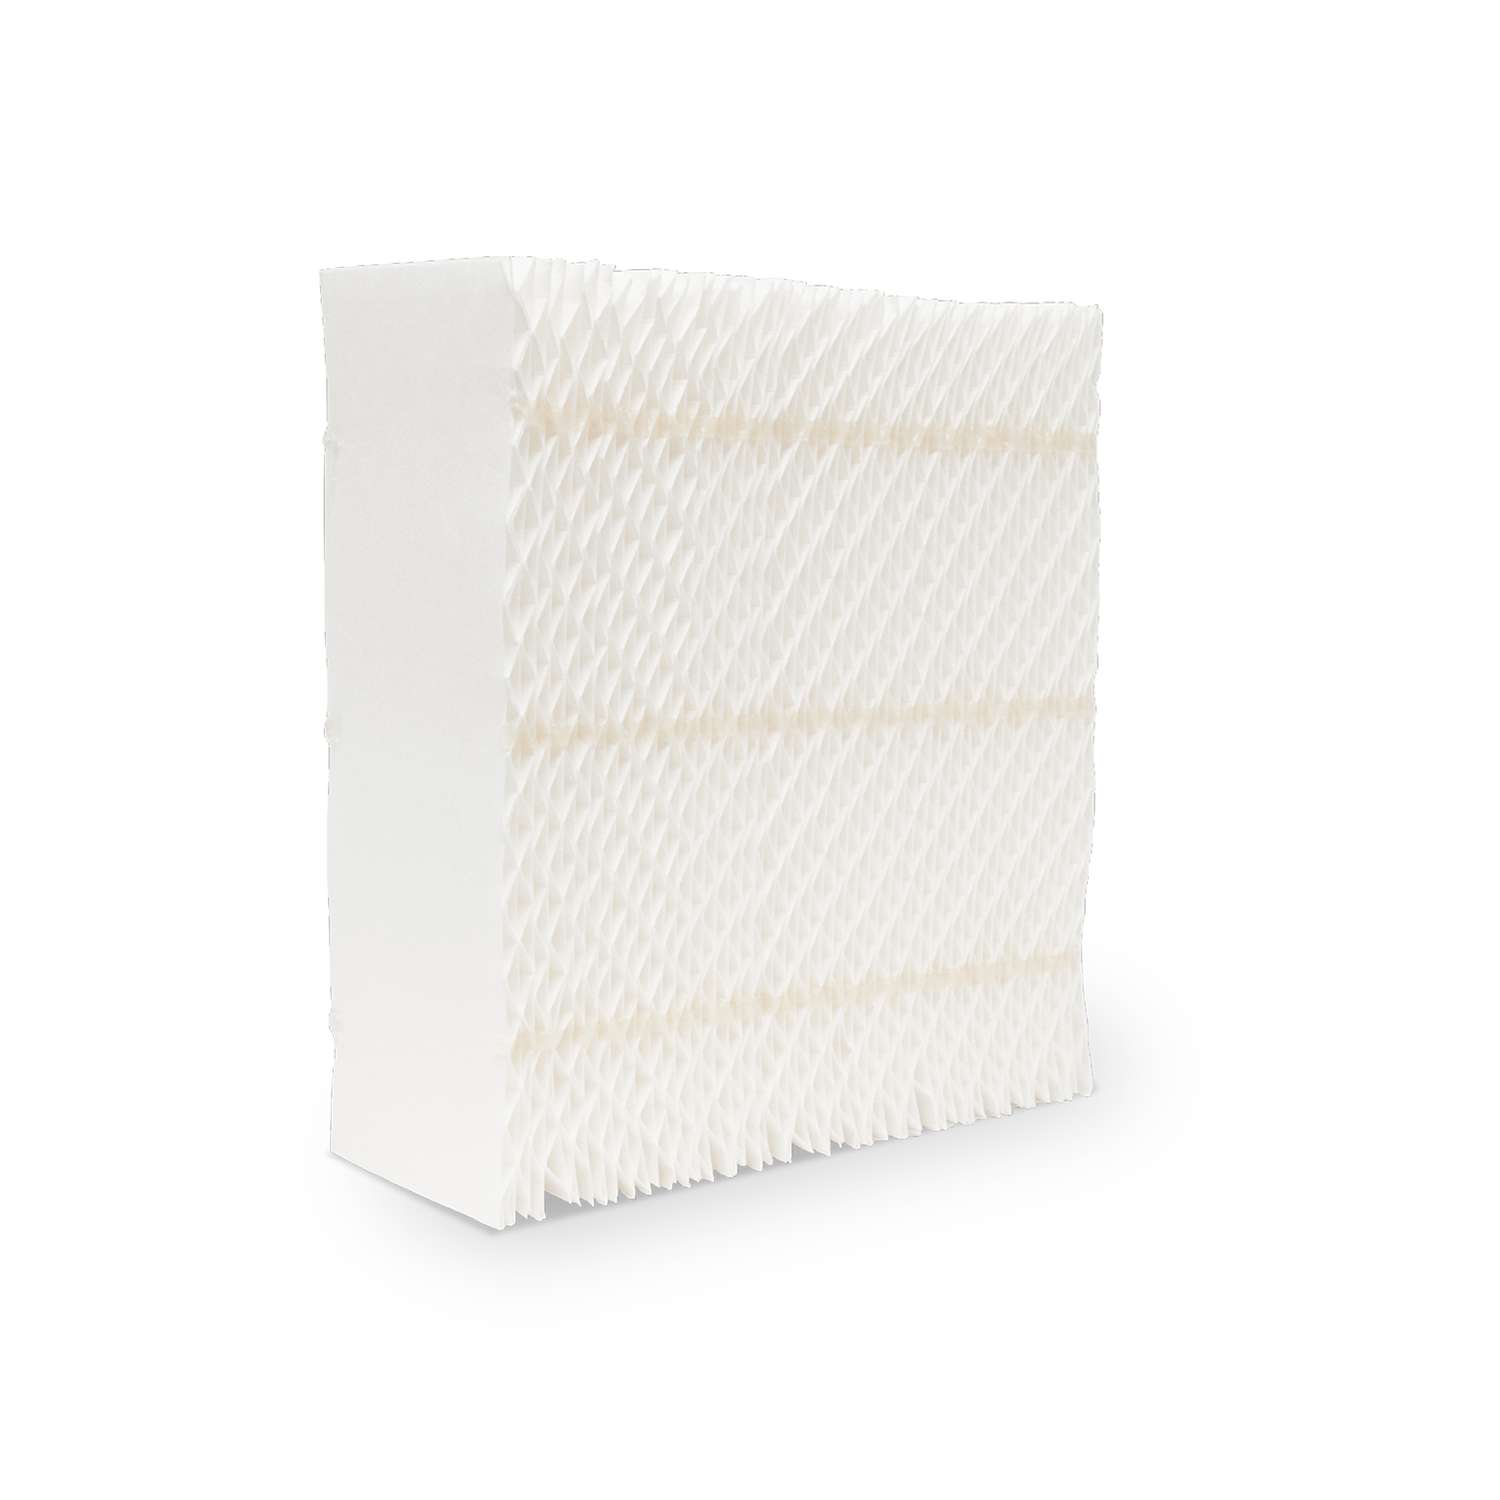 AirCare 1043 Super Wick Replacement Humidifier Filter GENUINE 6 PACK